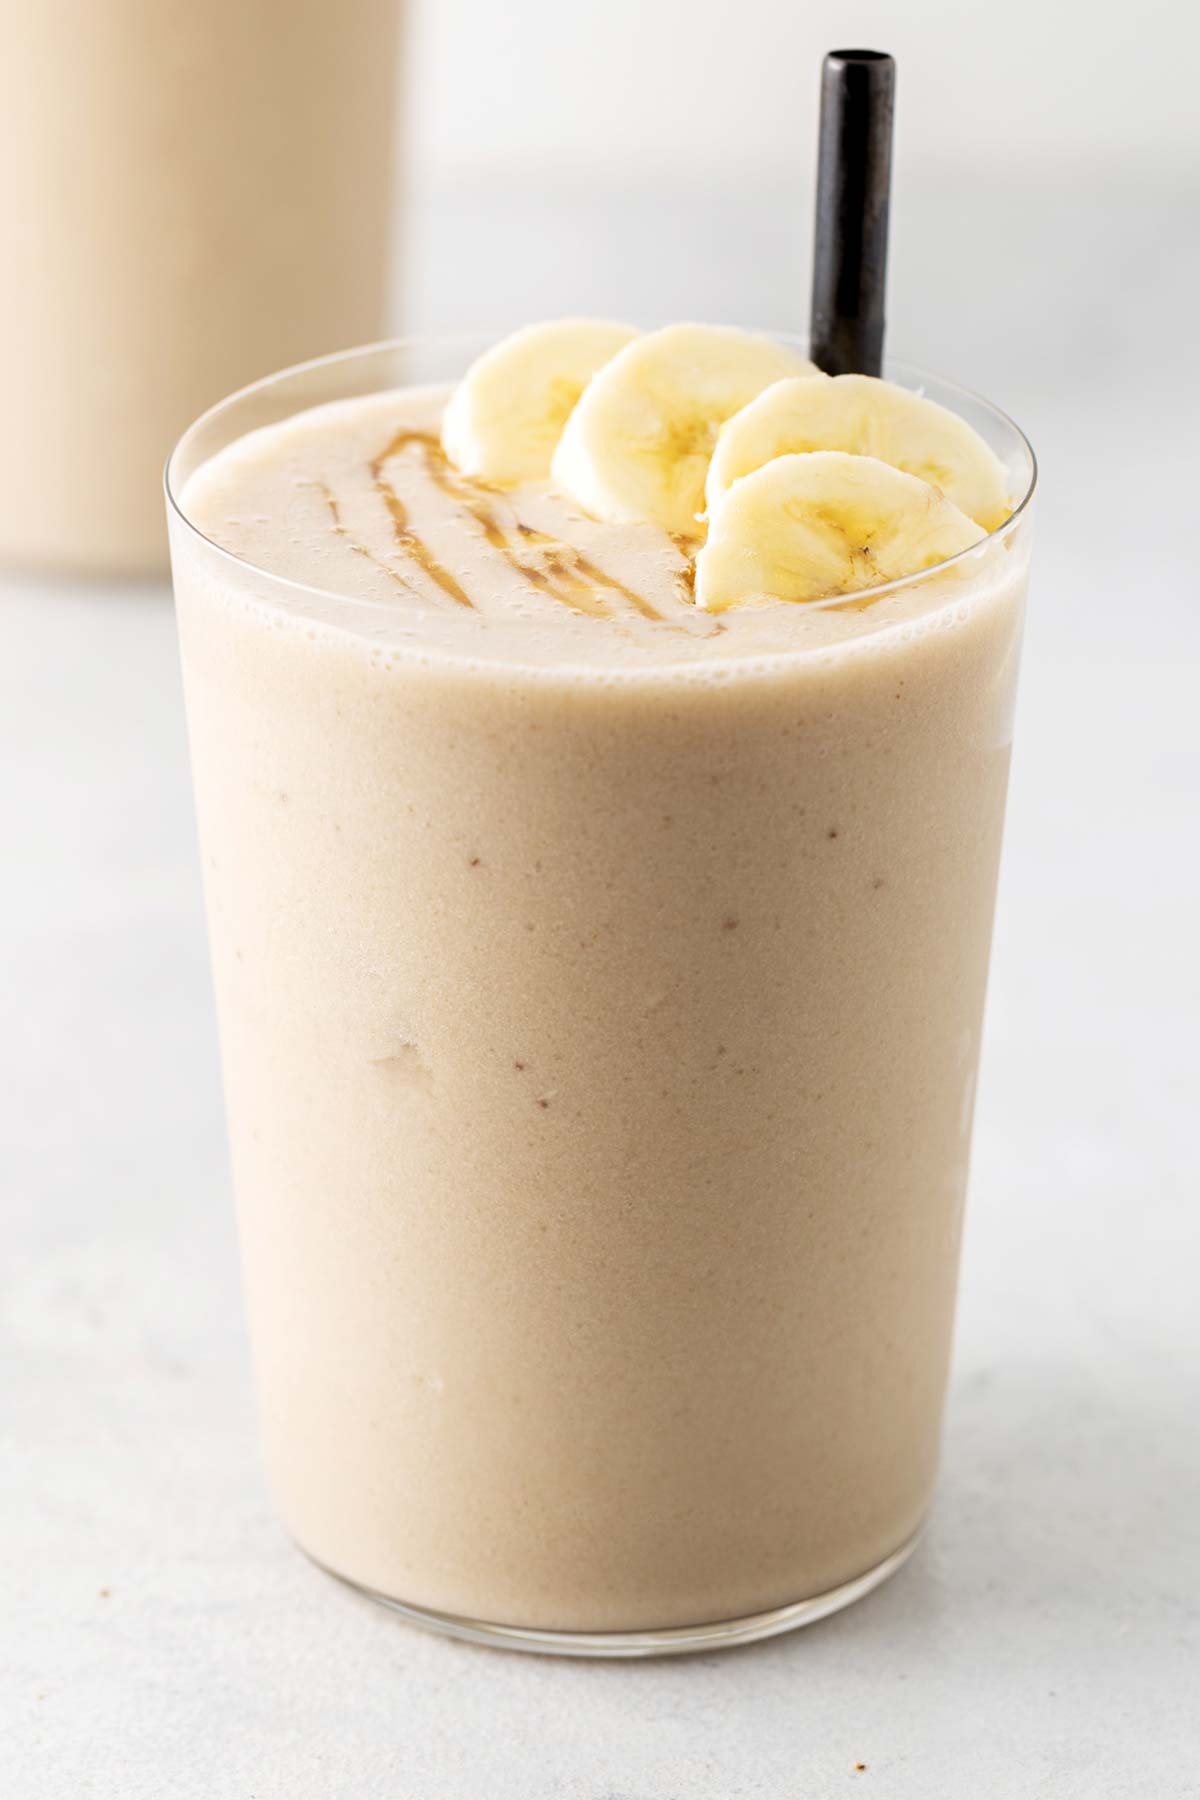 Banana smoothie in a glass.